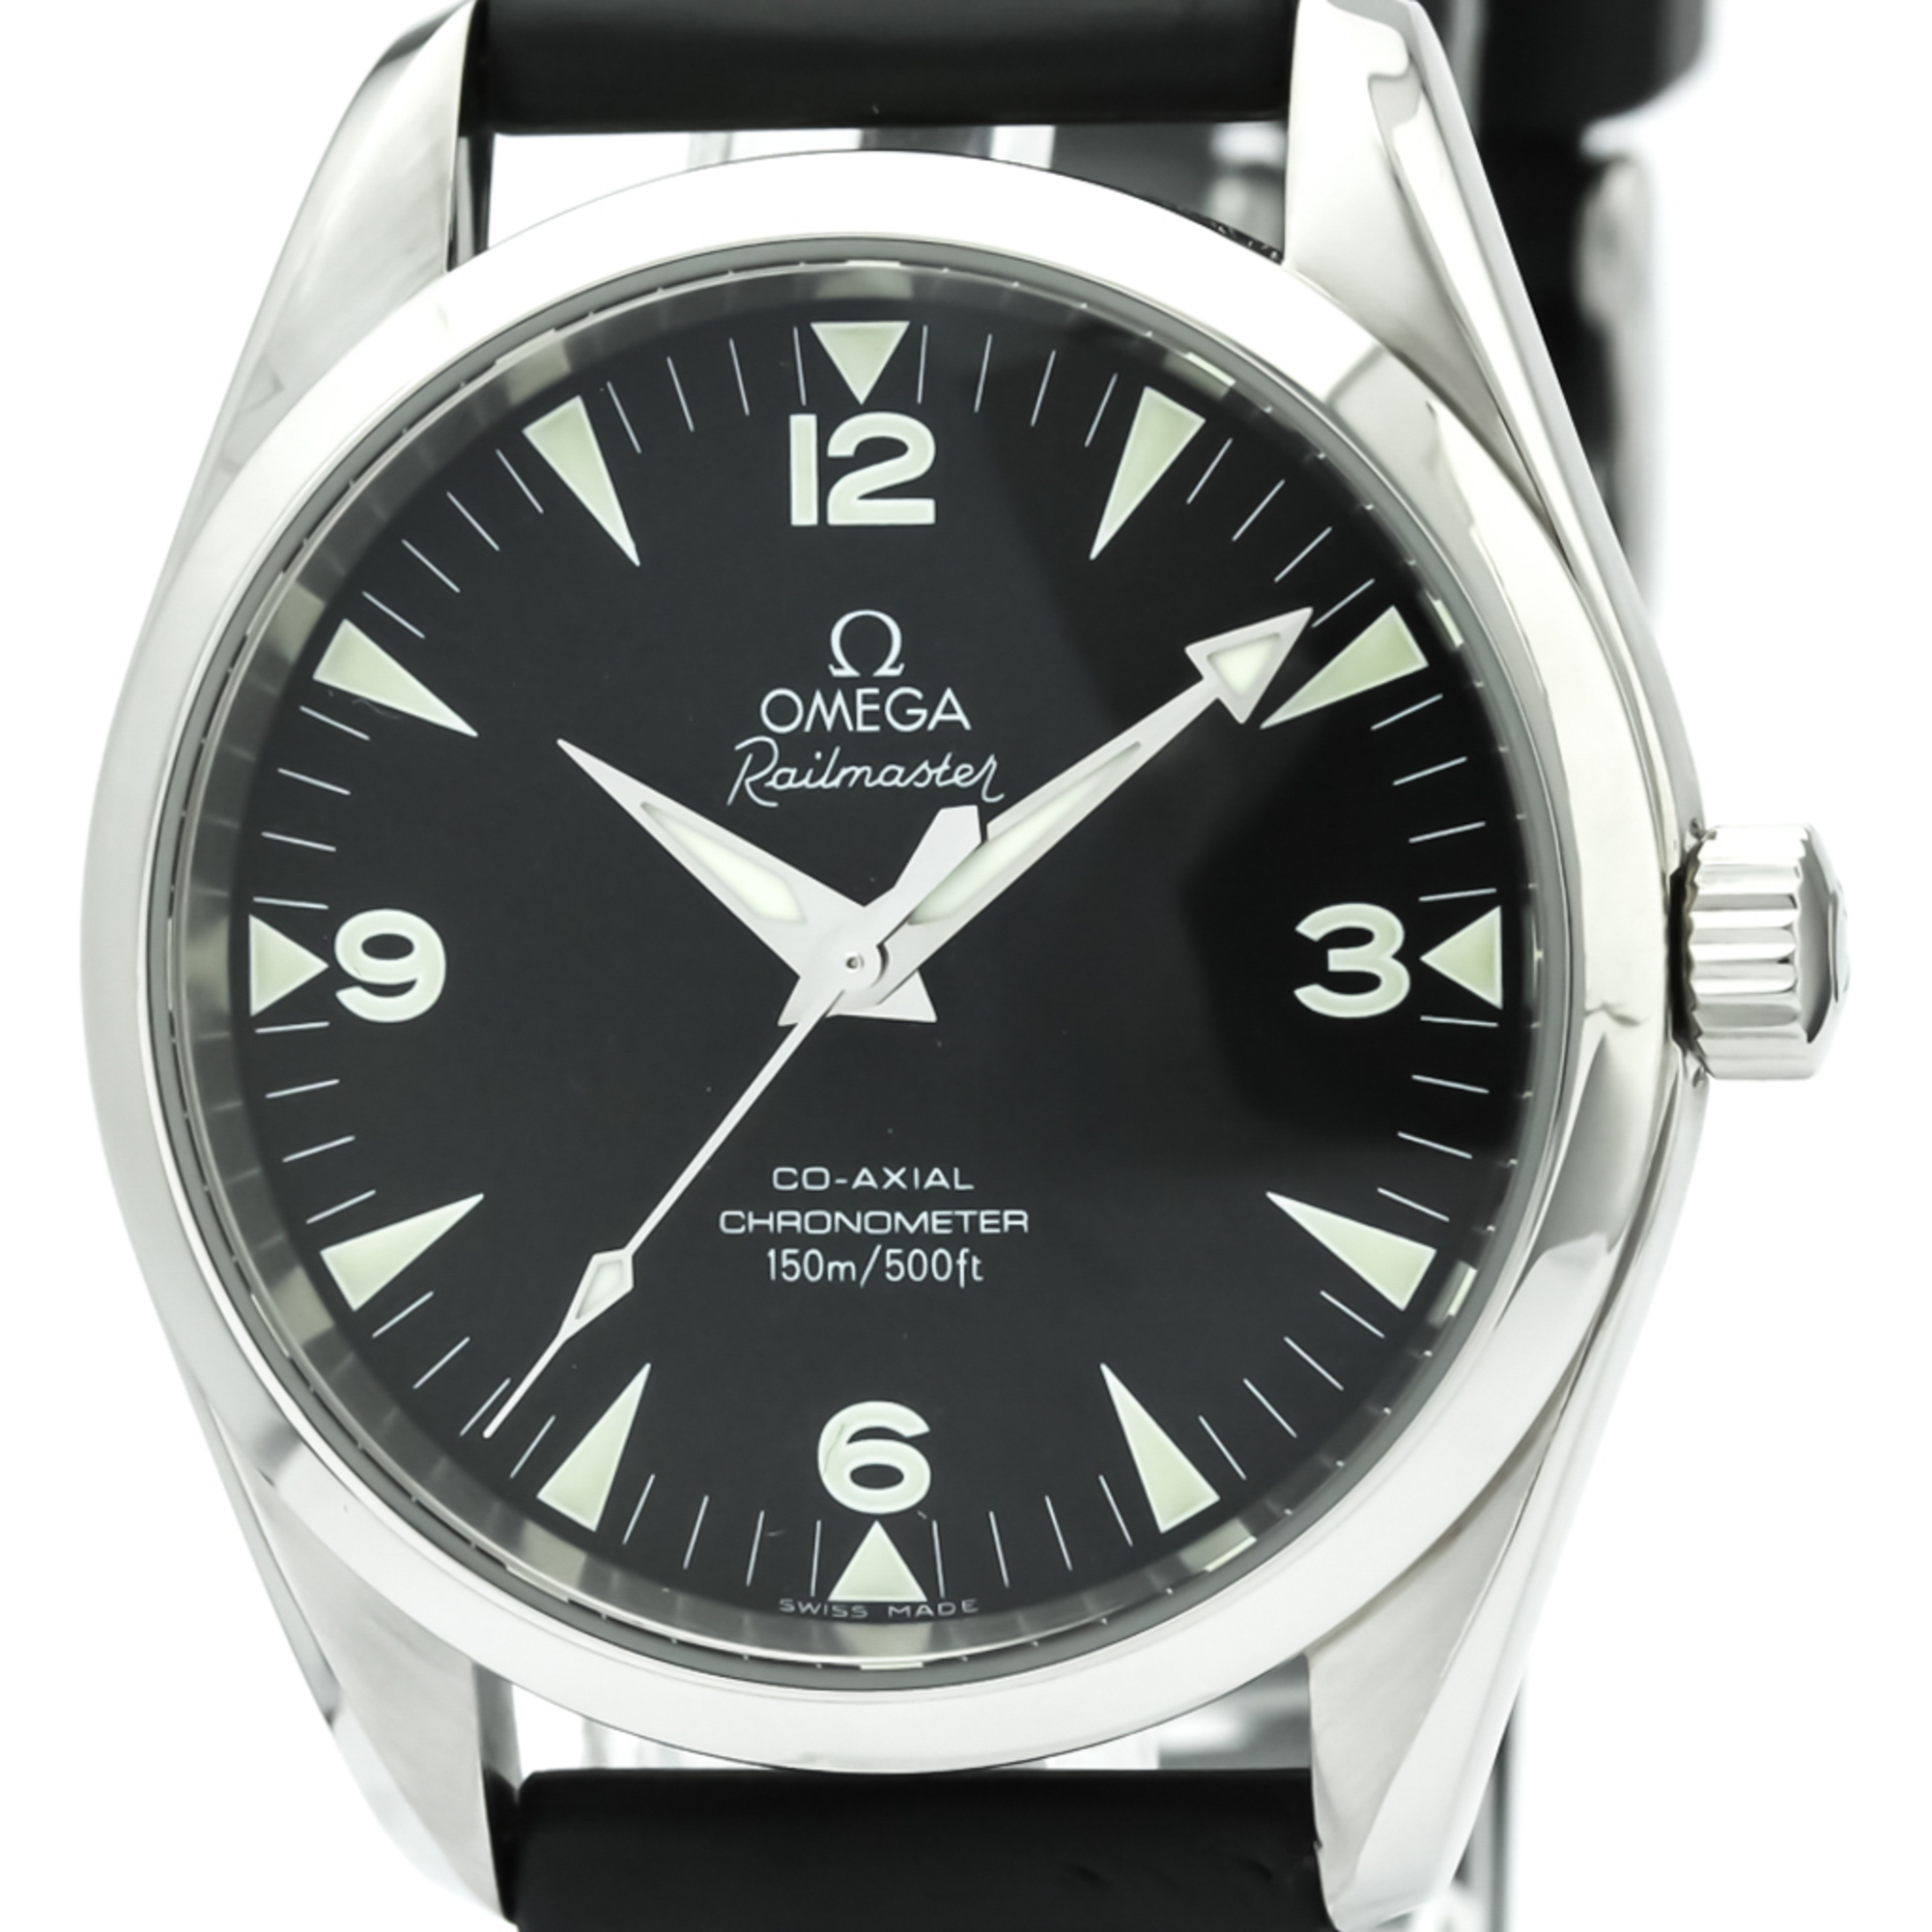 Omega Seamaster Automatic Stainless Steel Men's Sports Watch 2503.52